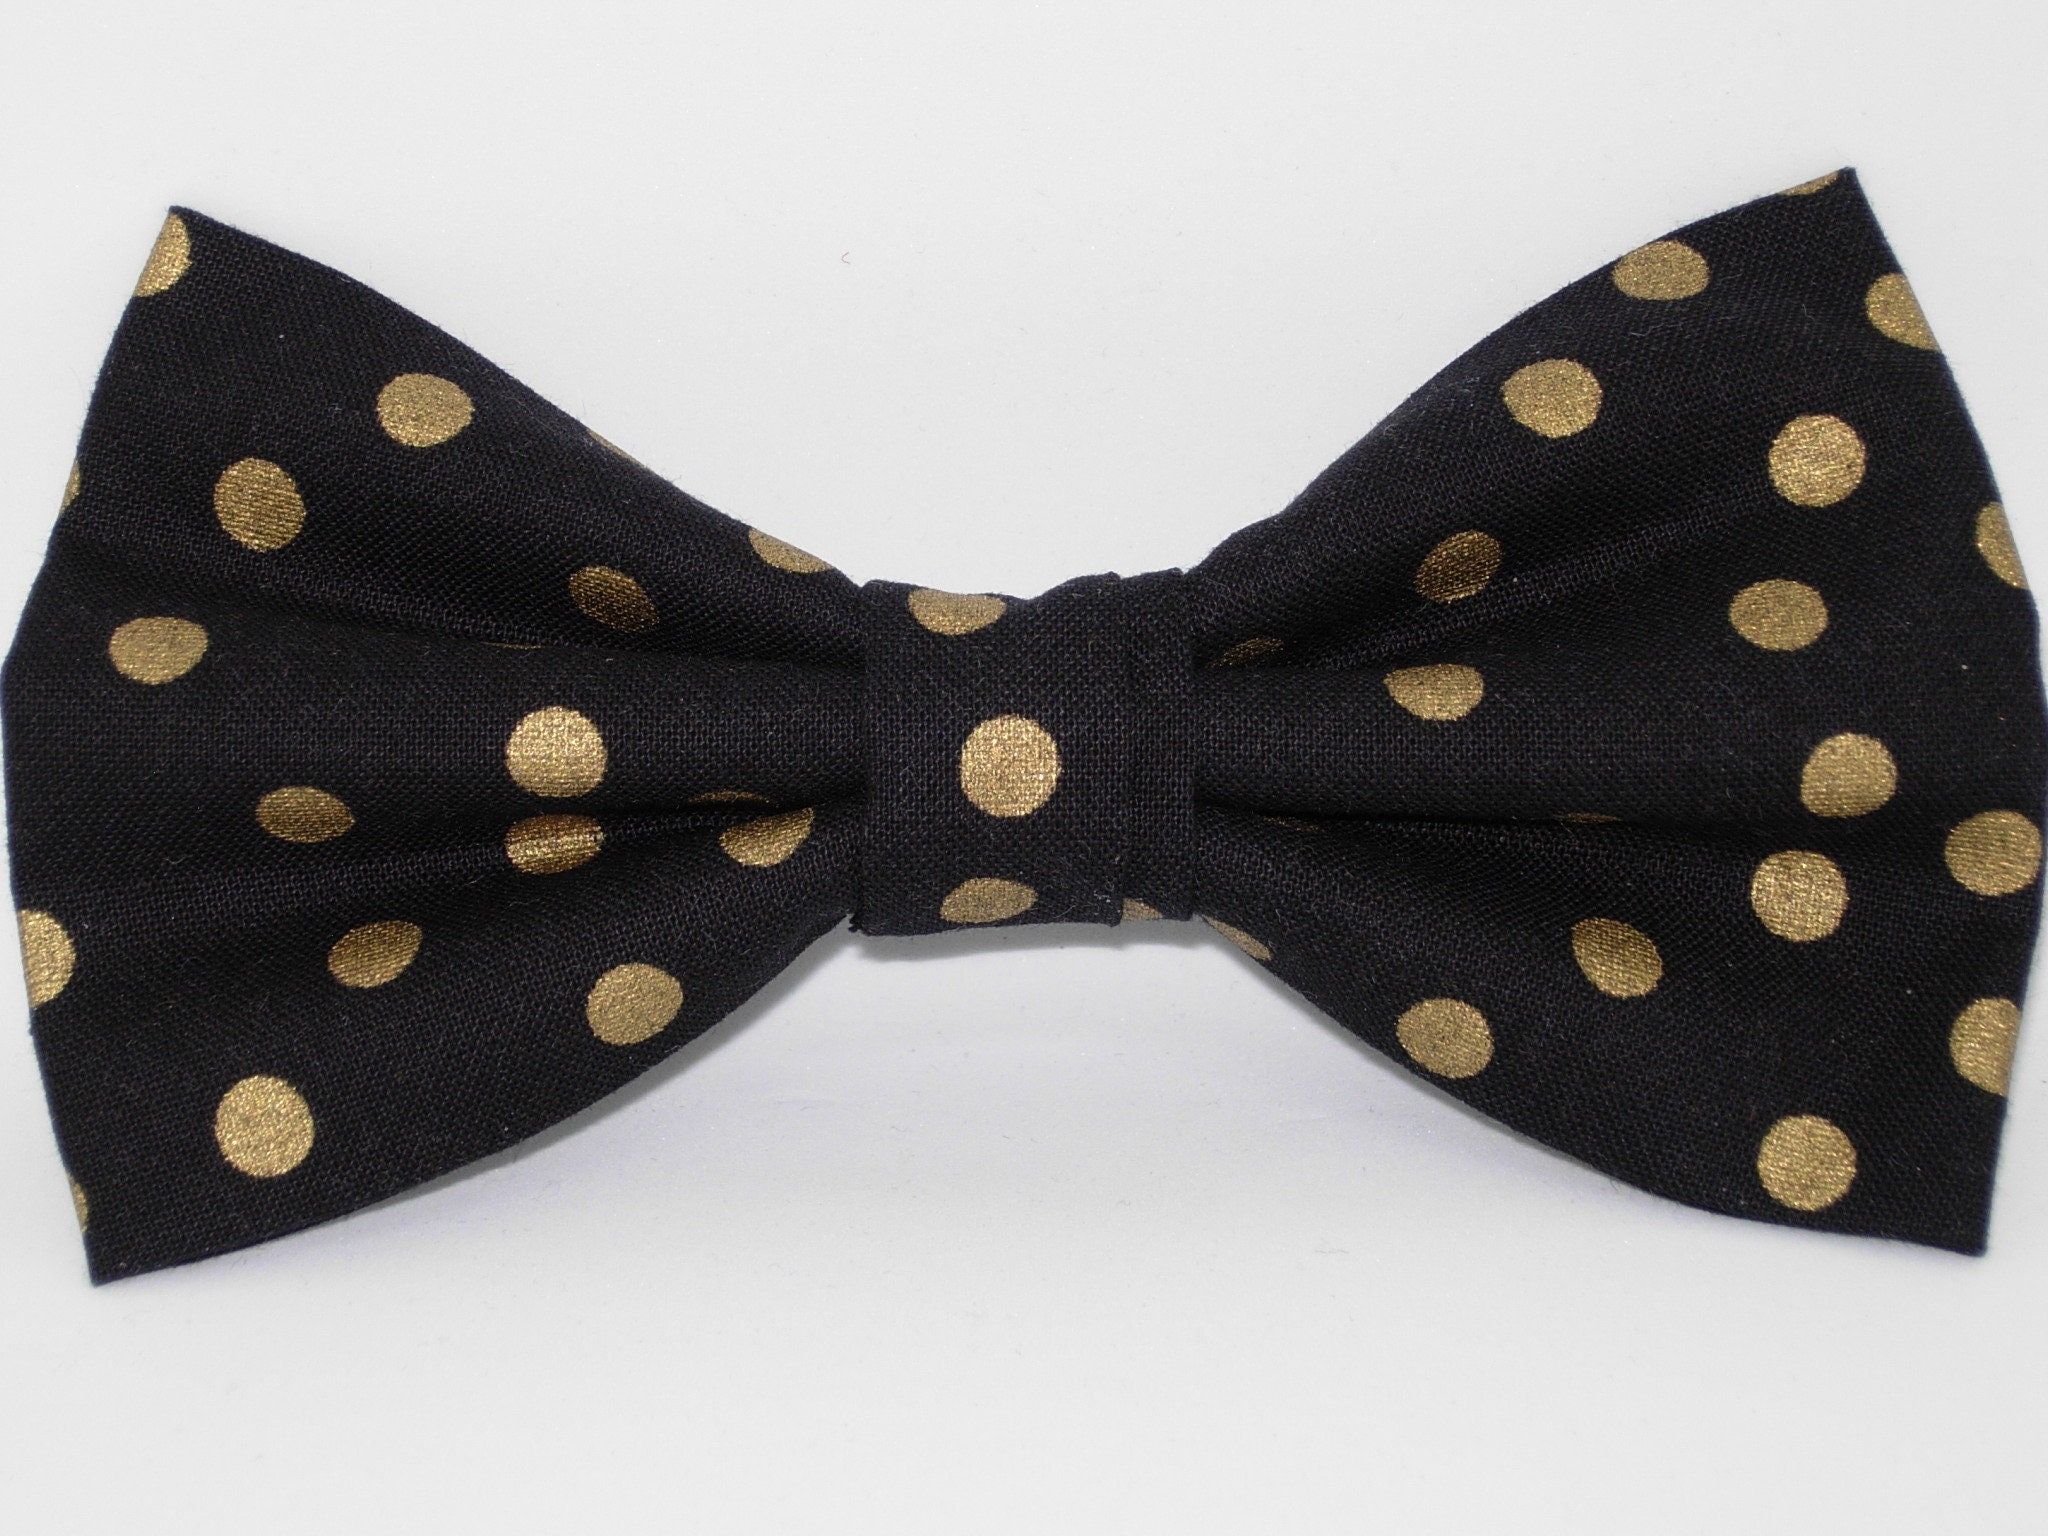 Gold & Black Bow Tie Metallic Gold Dots Pre-tied Bow Tie | Etsy